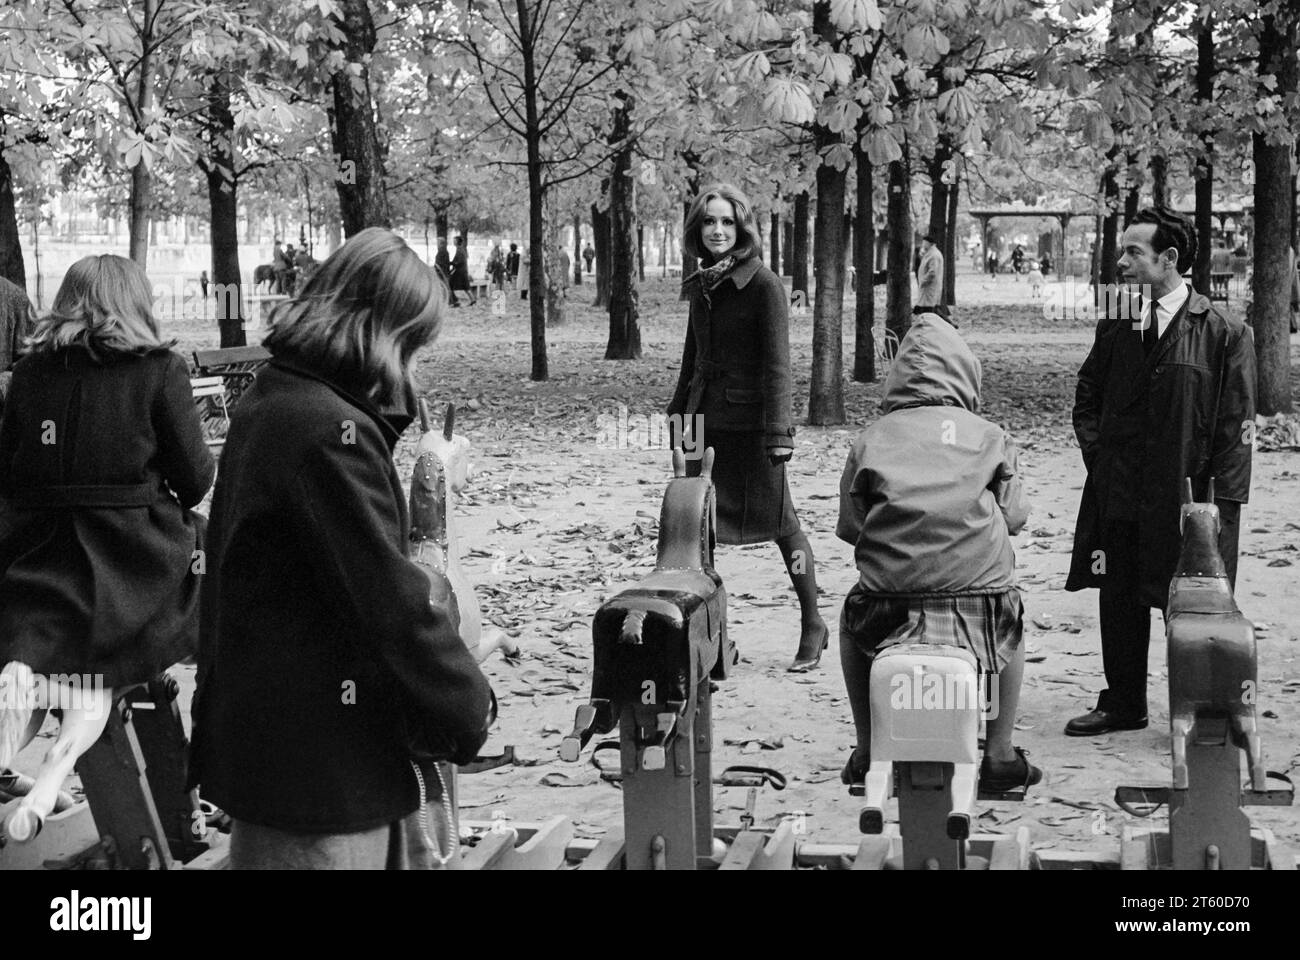 1960s, woman fashion model and man look at children playing on a horse carousel, Jardin des Tuileries garden, Paris, France, Europe, Stock Photo